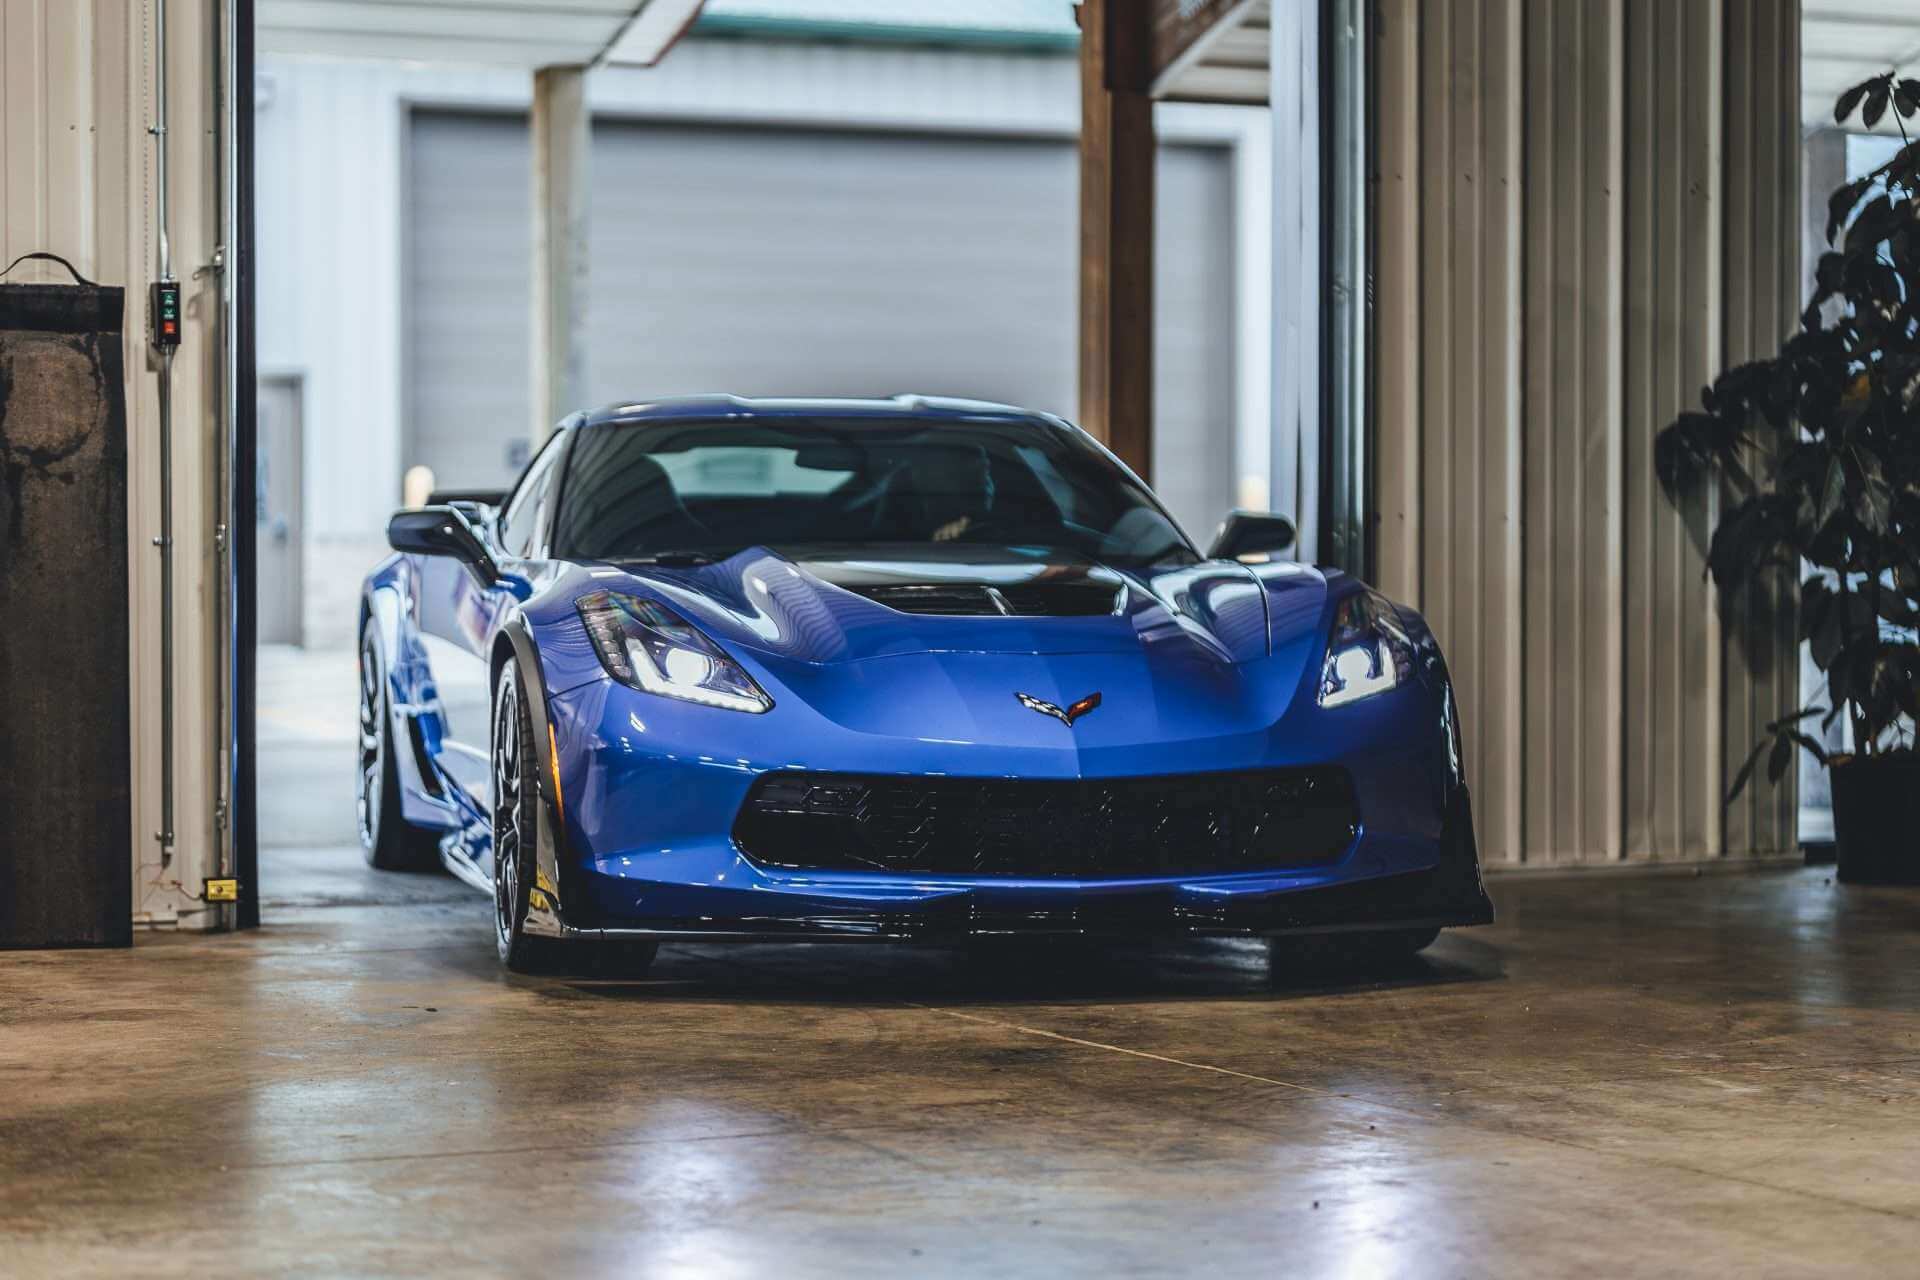 A beautiful blue 2019 Chevrolet Corvette Z06 after receiving professional detailing services at Med City Detail.